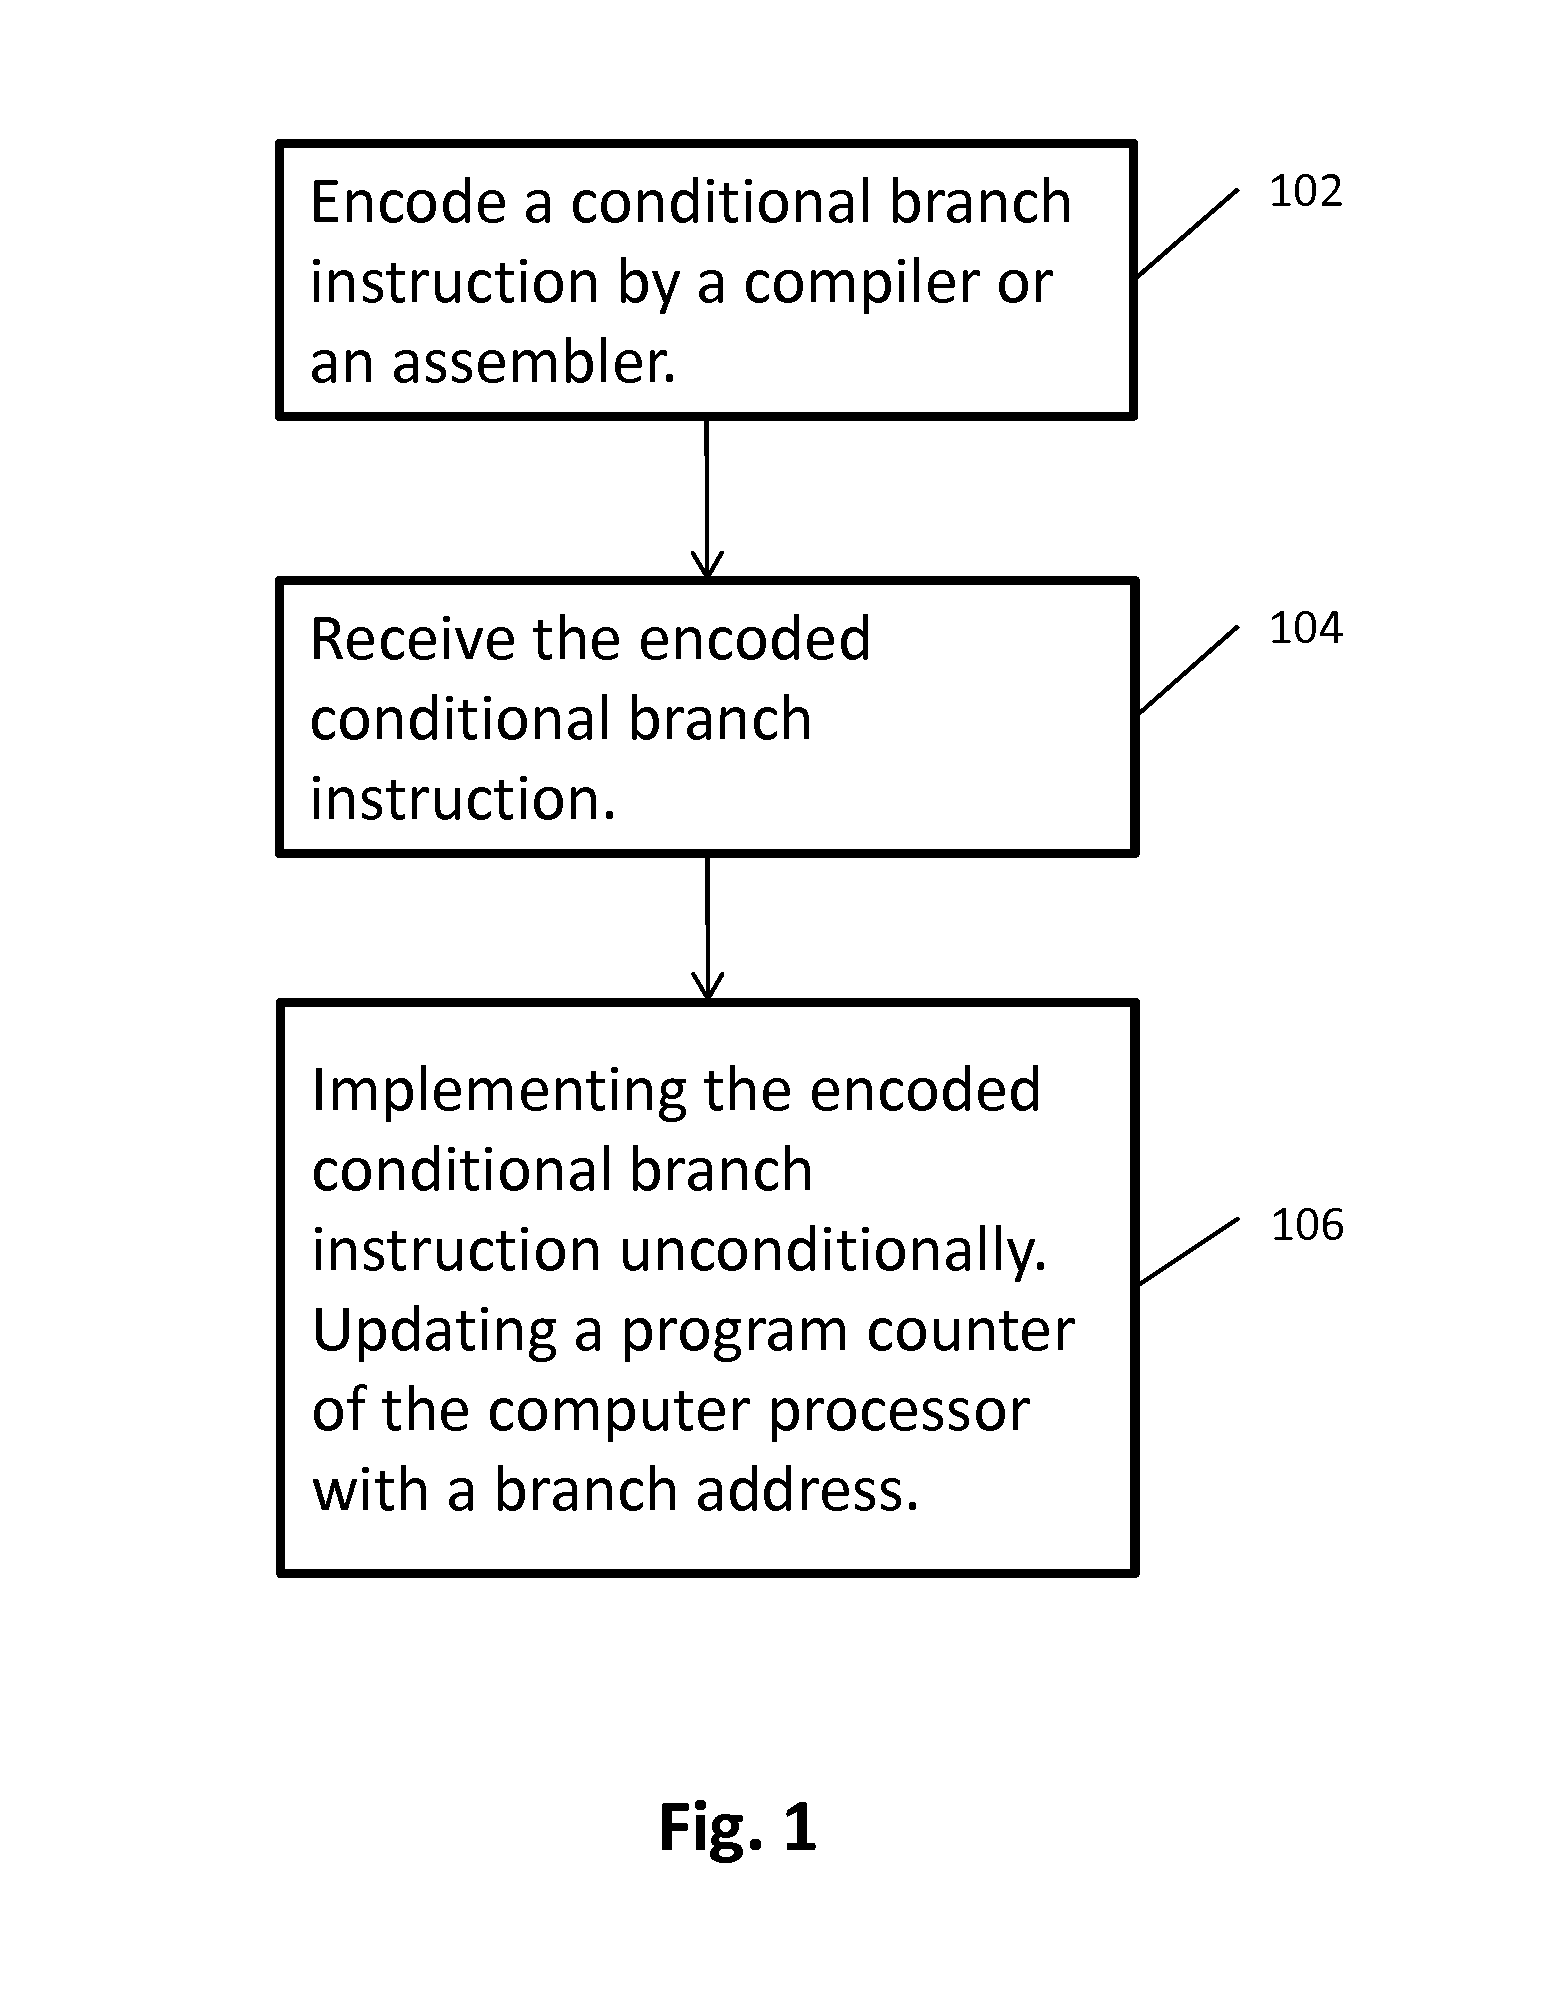 Computer processor with instruction for execution based on available instruction sets